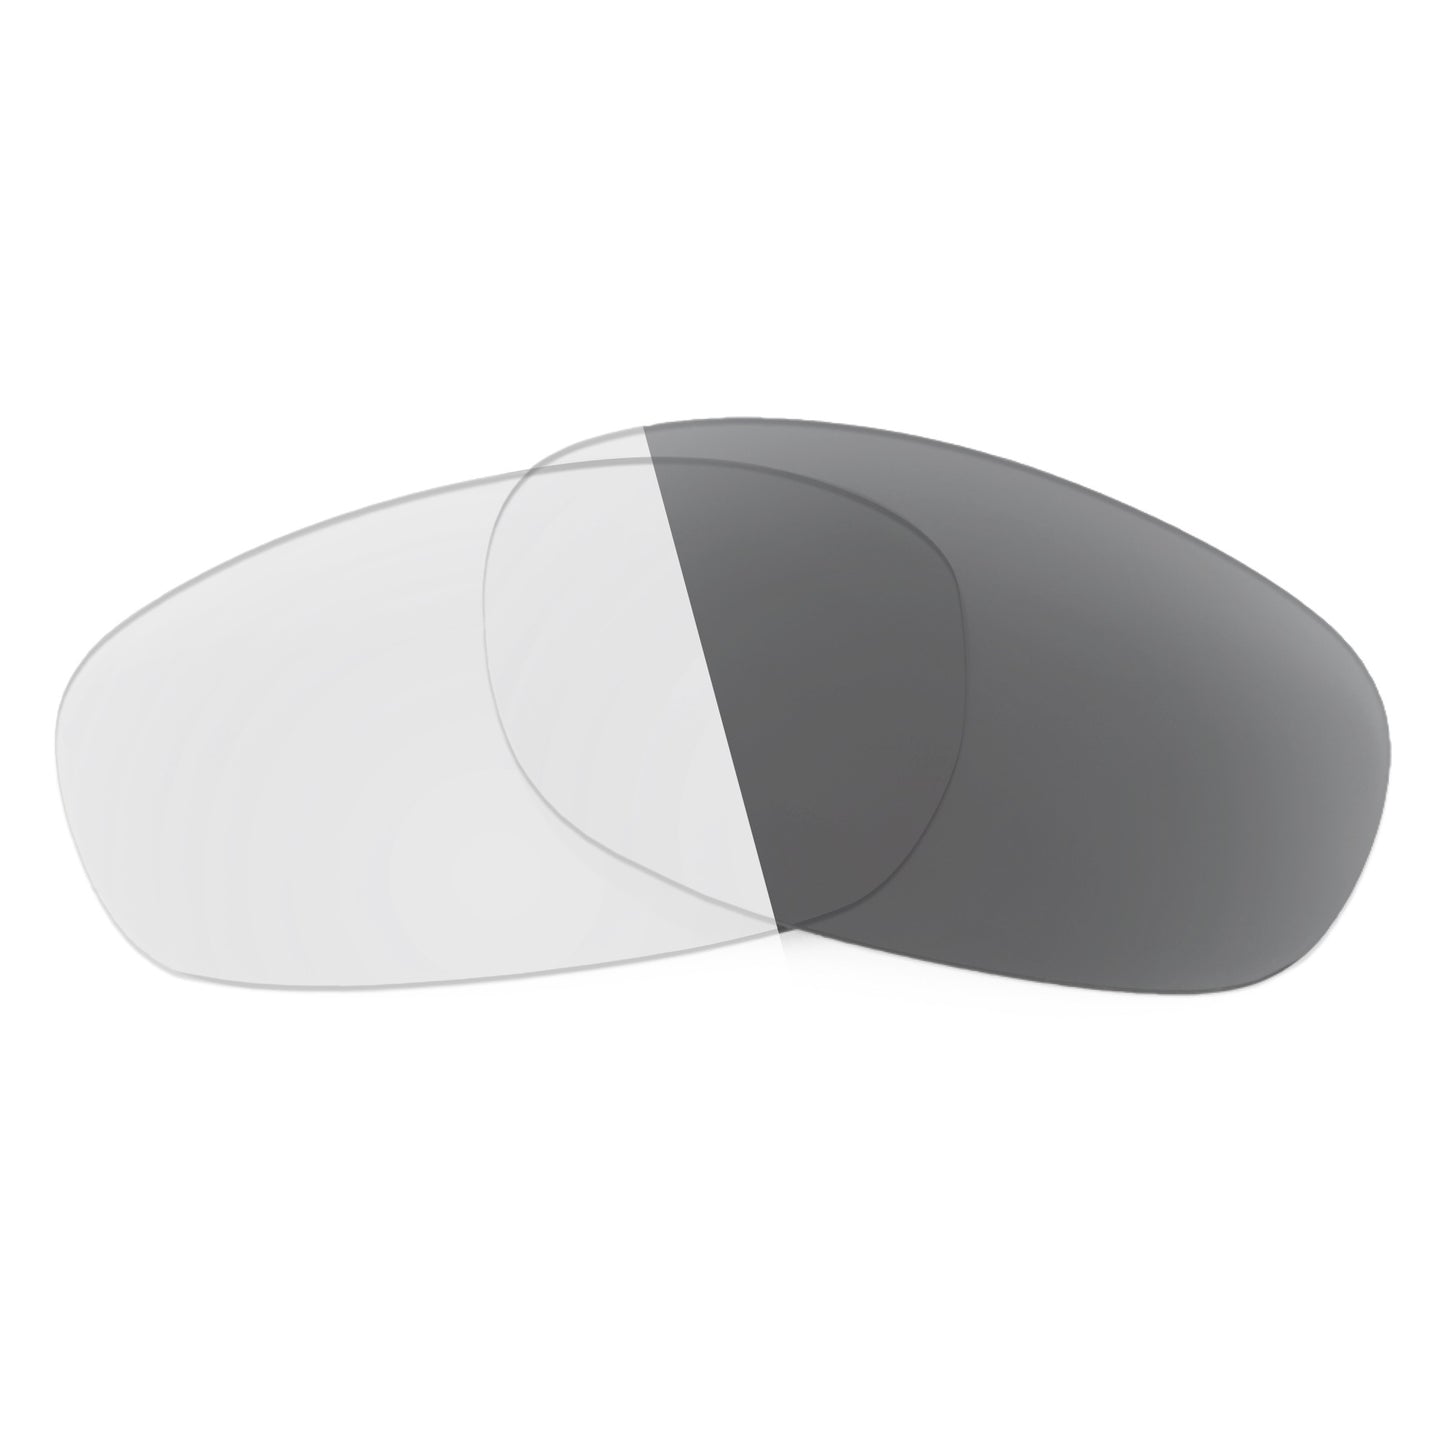 Revant replacement lenses for Ray-Ban RB3212 61mm Non-Polarized Adapt Gray Photochromic